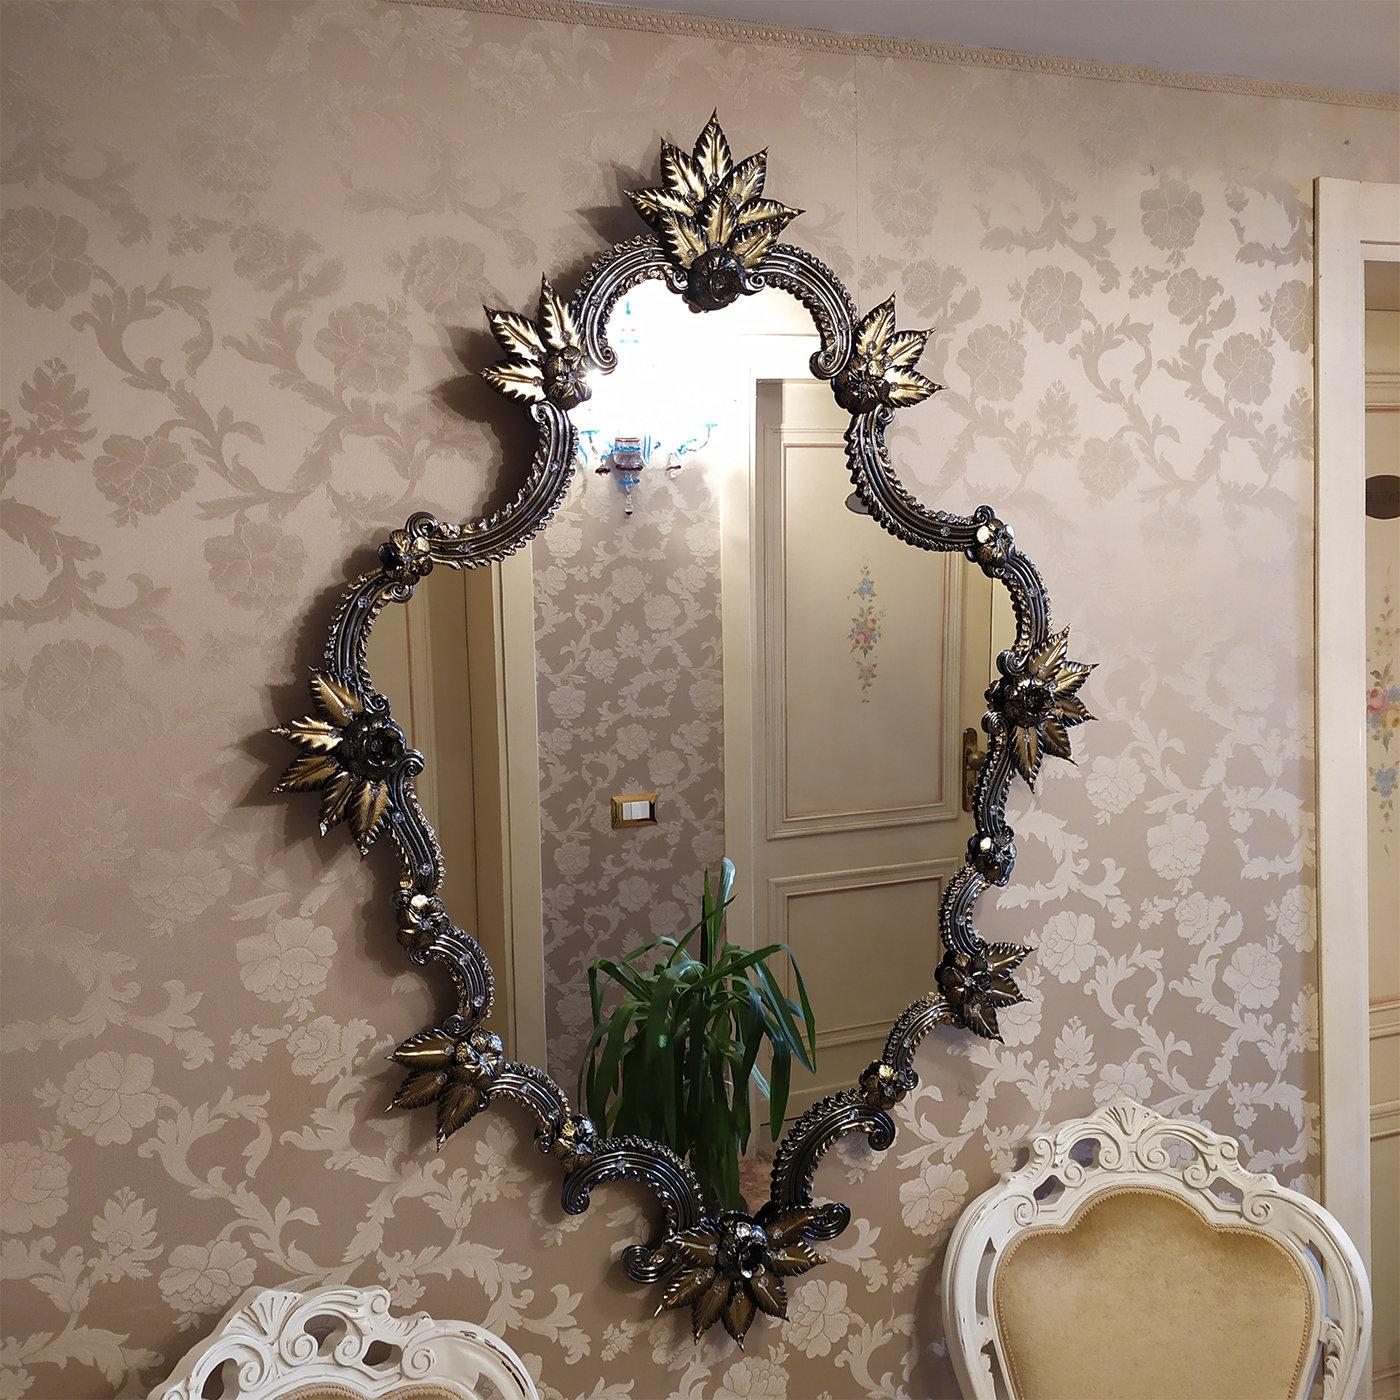 Exuding an opulent and dramatic allure, this wall mirror will make a singular and refined addition to an eclectic modern interior. A superb embodiment of the Venetian style and the valuable, long-lasting tradition of glassmaking, it is handmade of